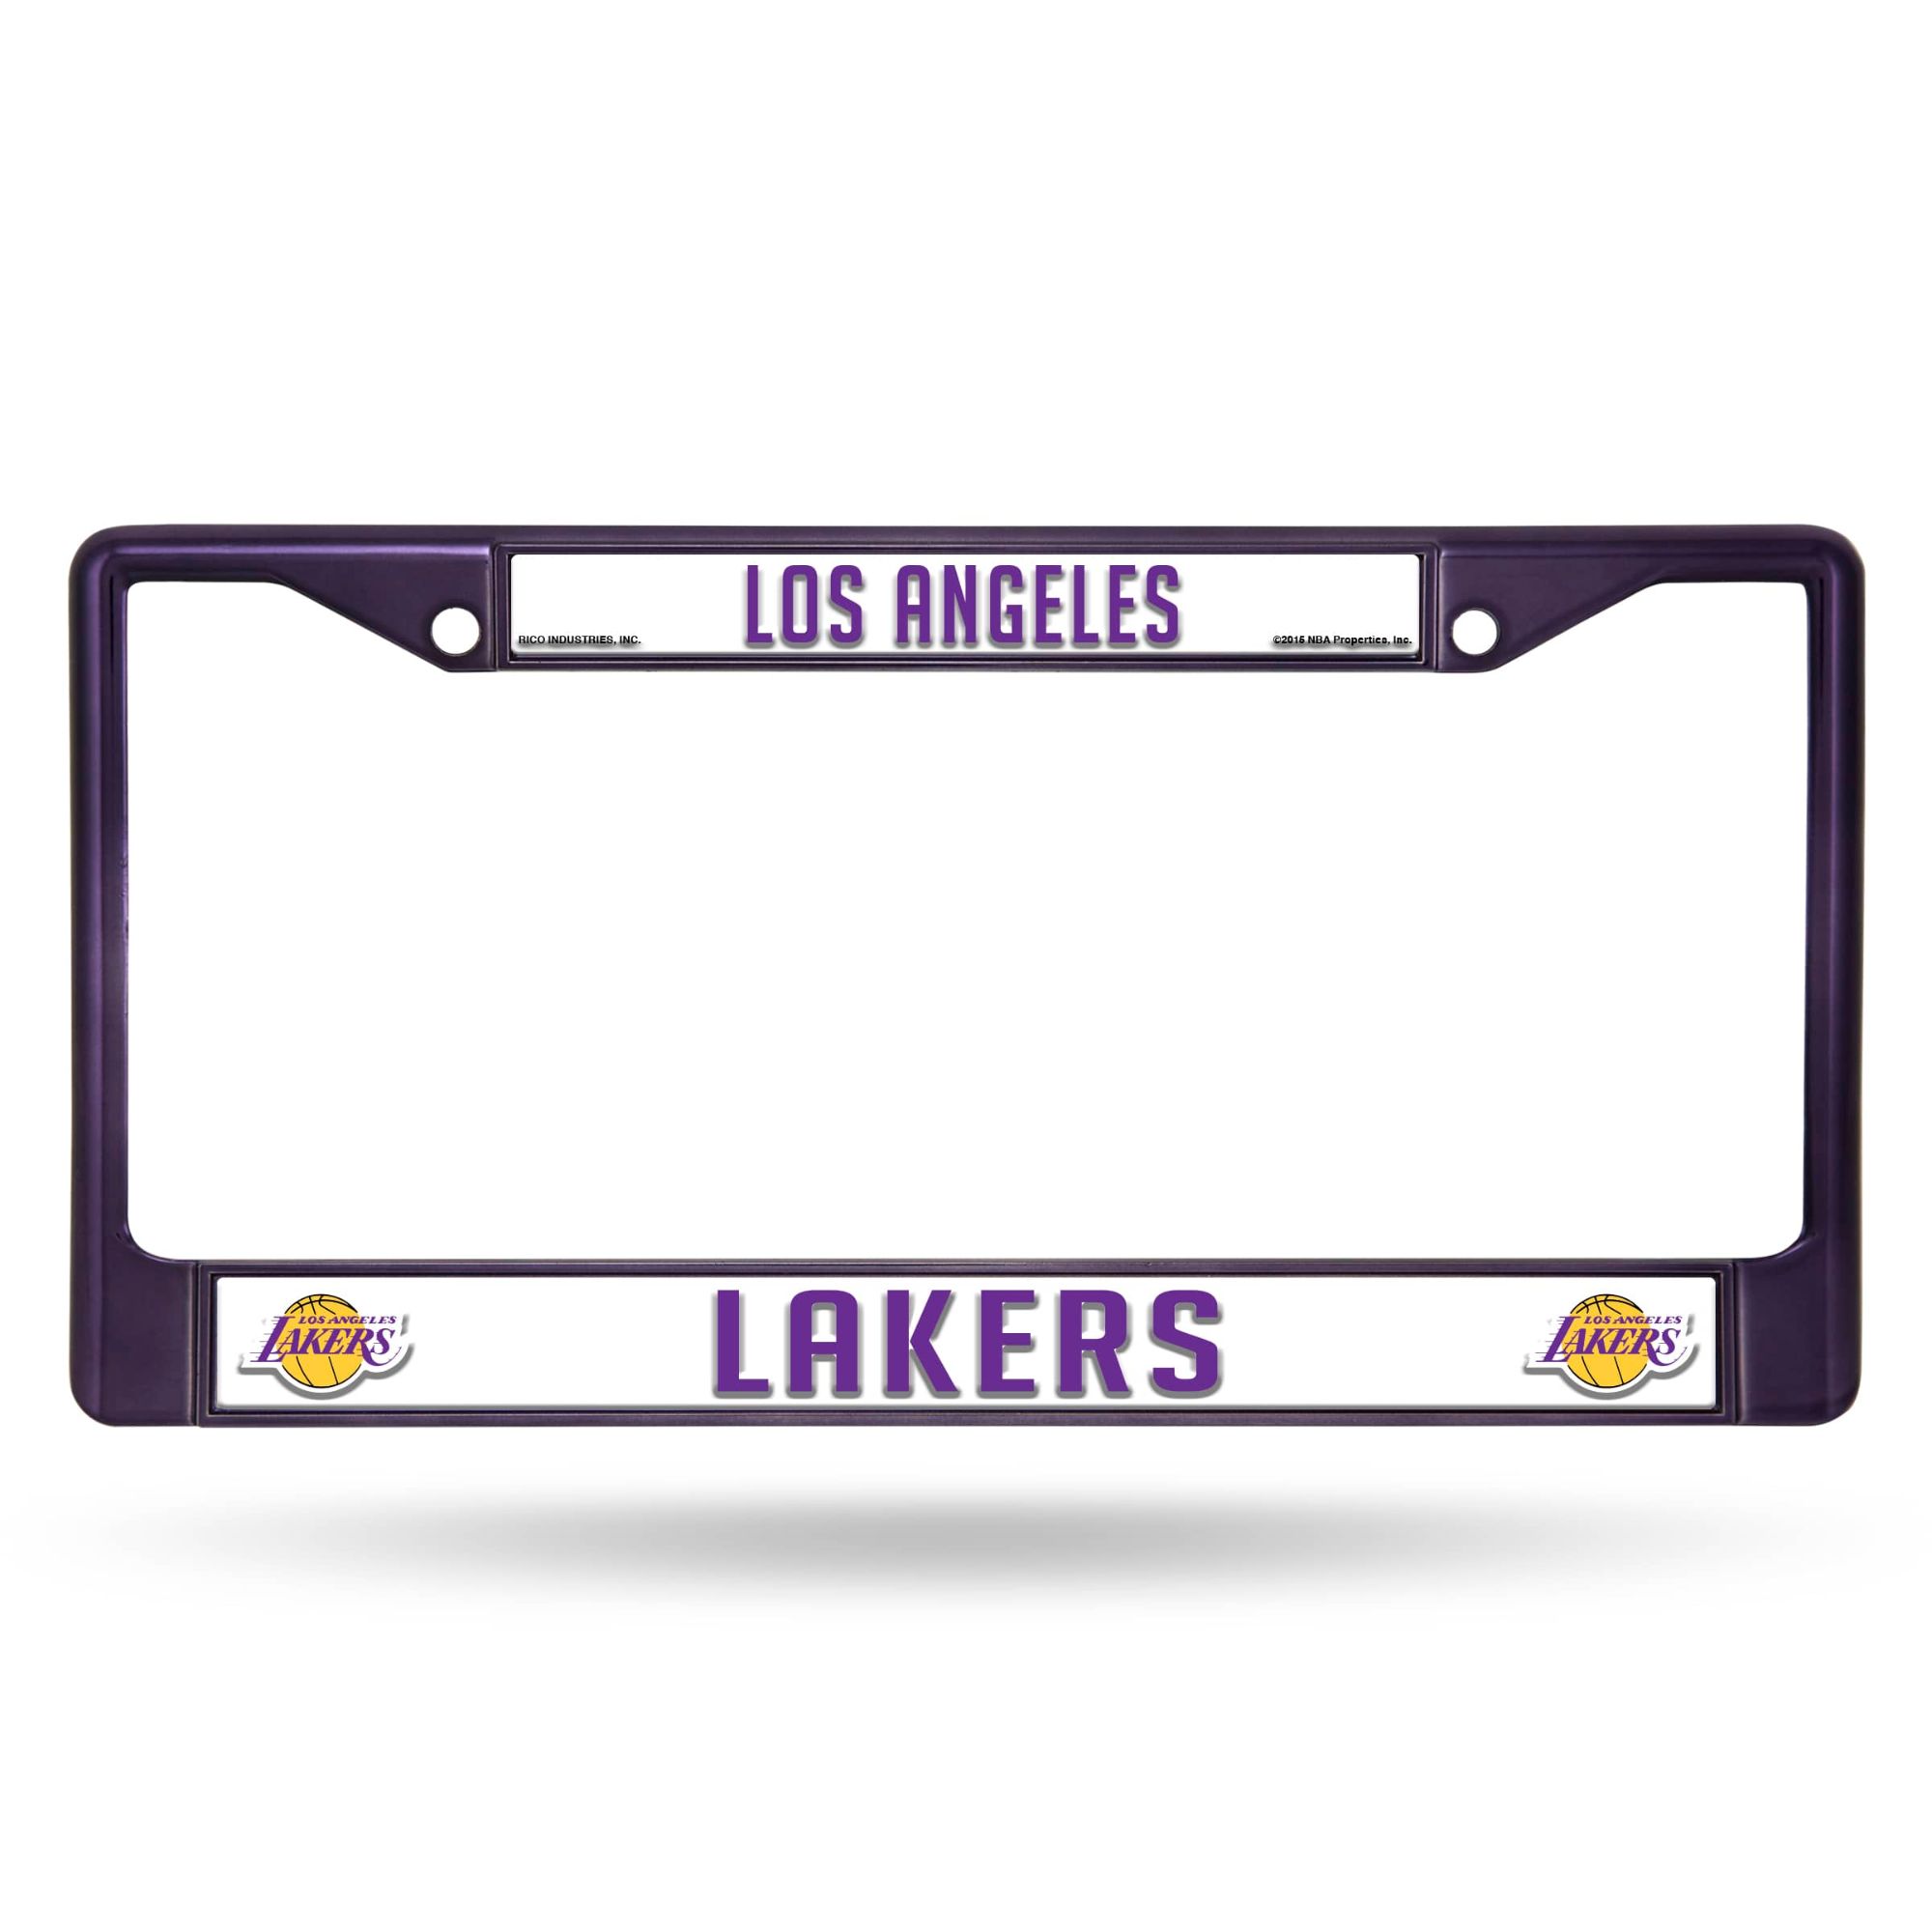 Rico 6" x 12" Purple and White NBA Los Angeles Lakers License Plate Cover